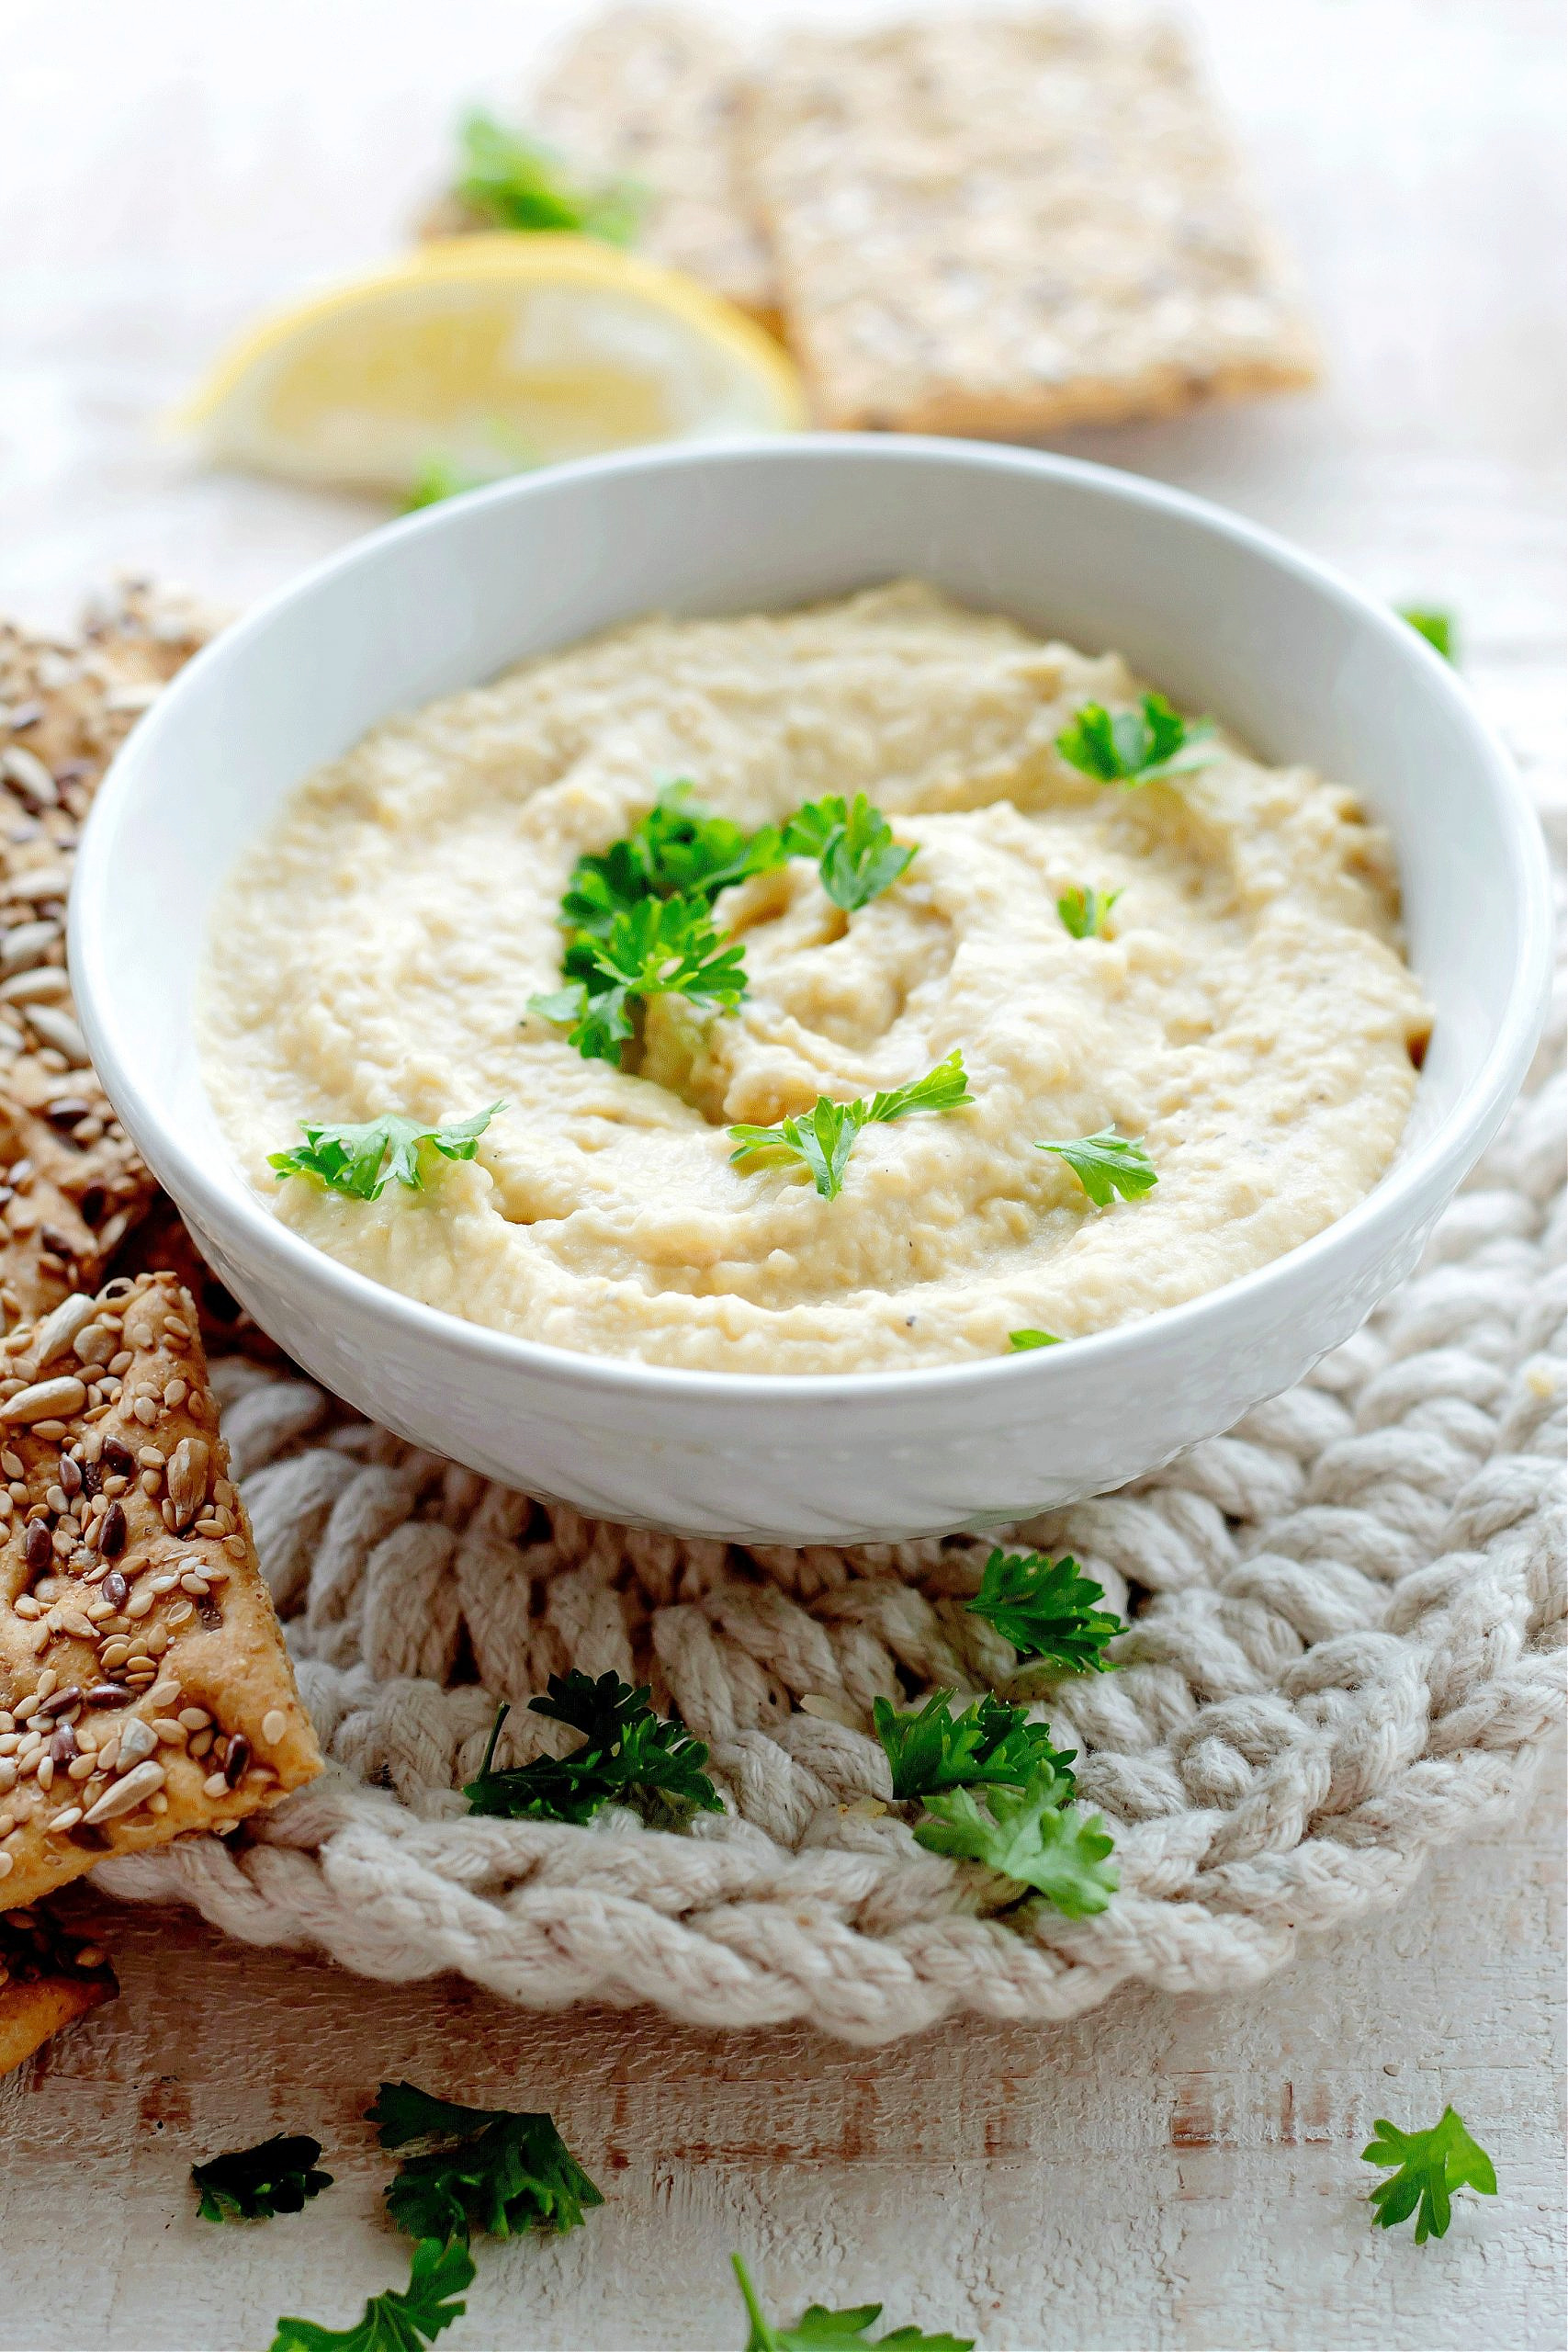 Creamy hummus topped with parsley in a white bowl and surrounded by crackers